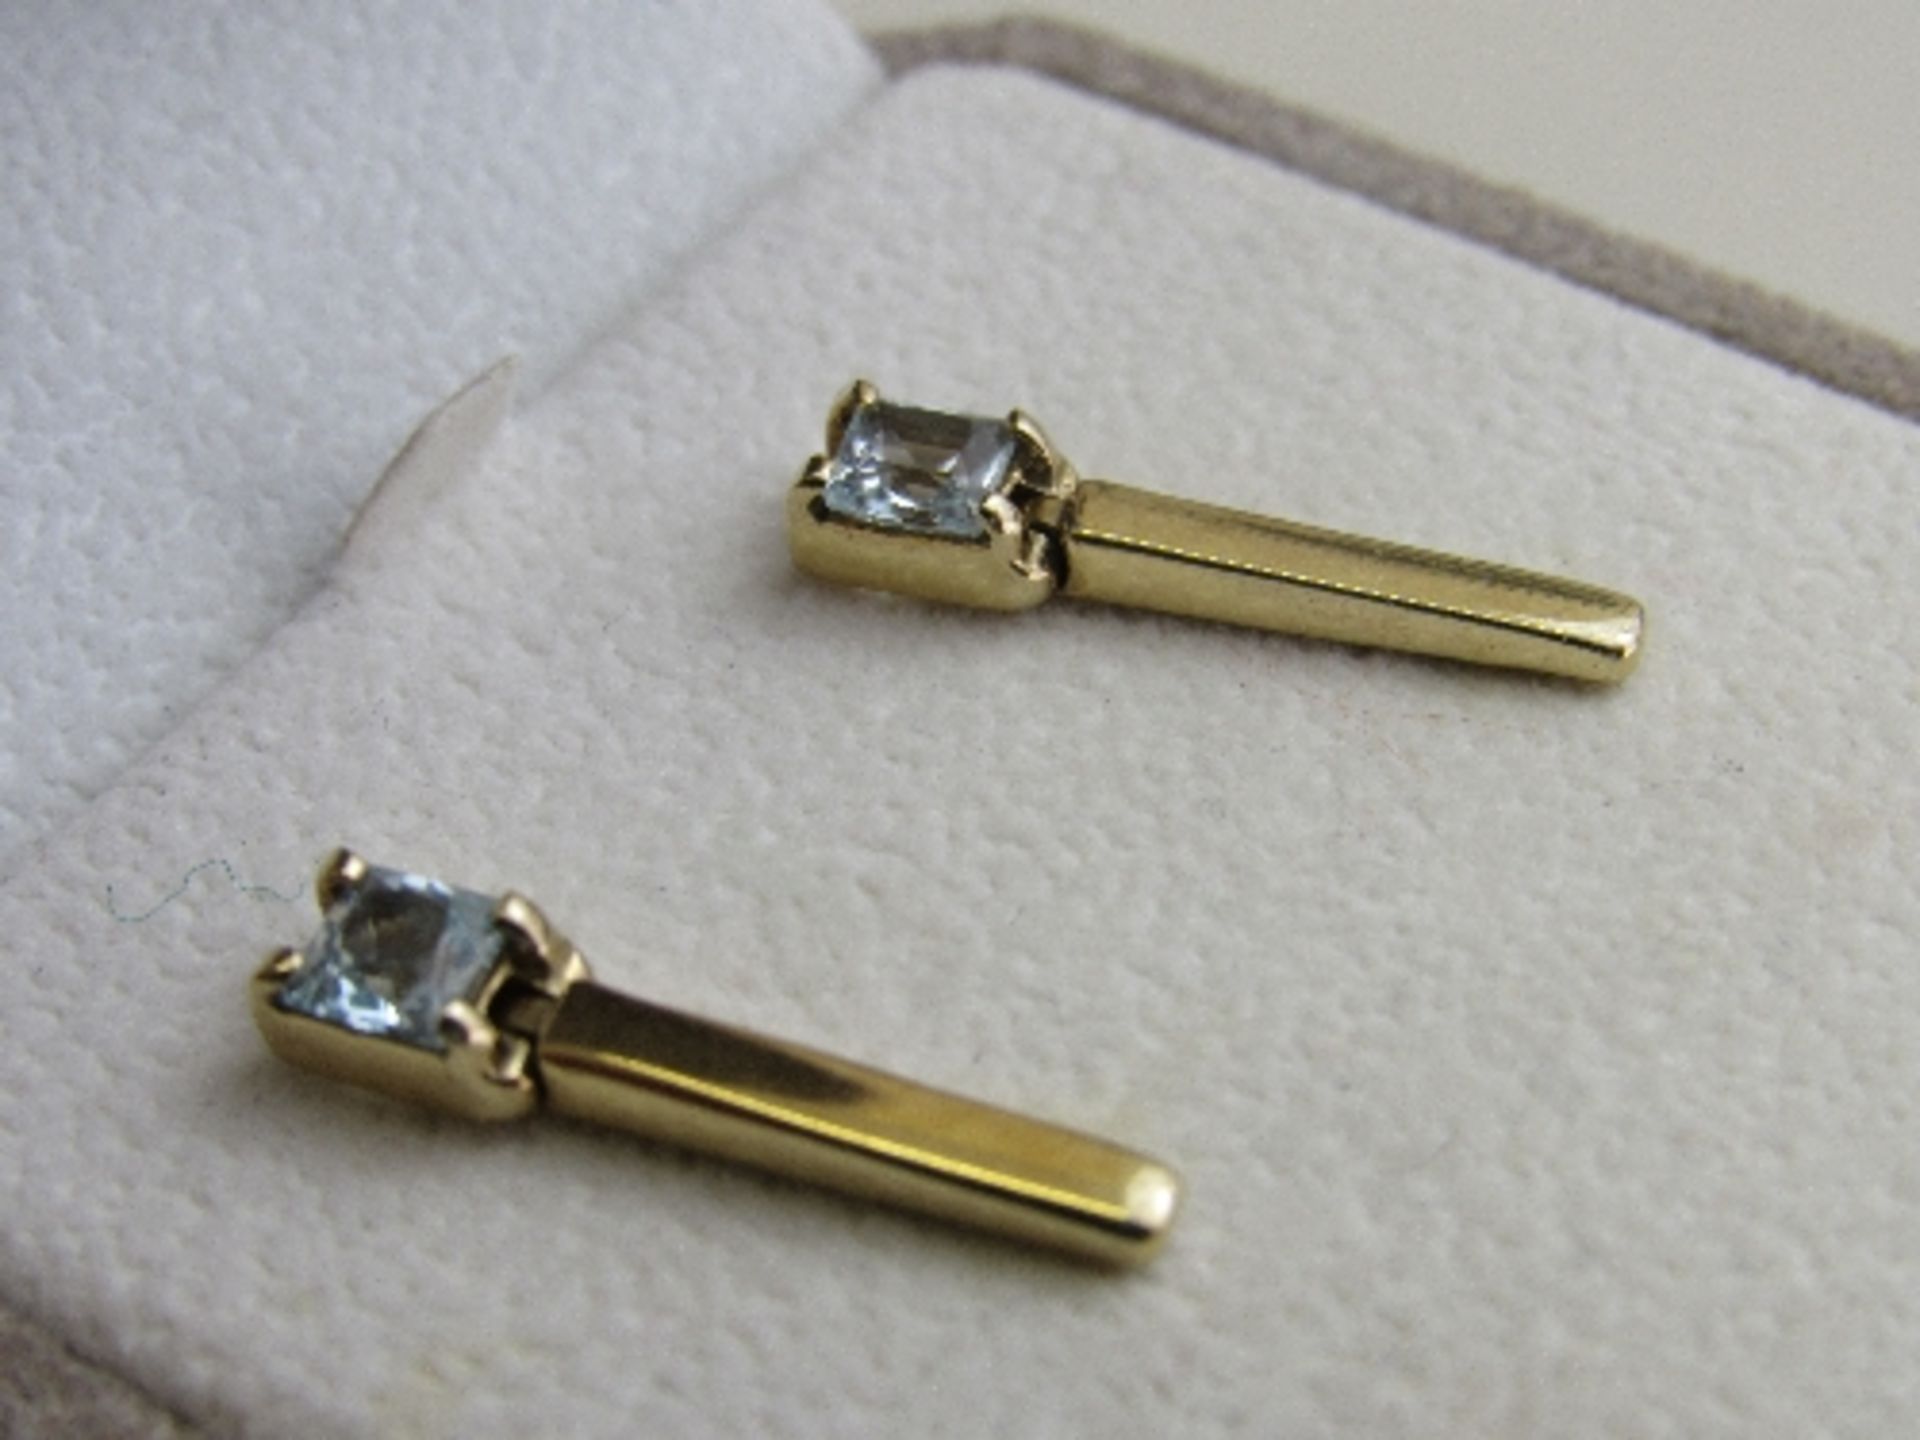 Pair of 9ct gold & pale blue stone earrings (boxed), weight 2gm. Estimate £20-30 - Image 2 of 2